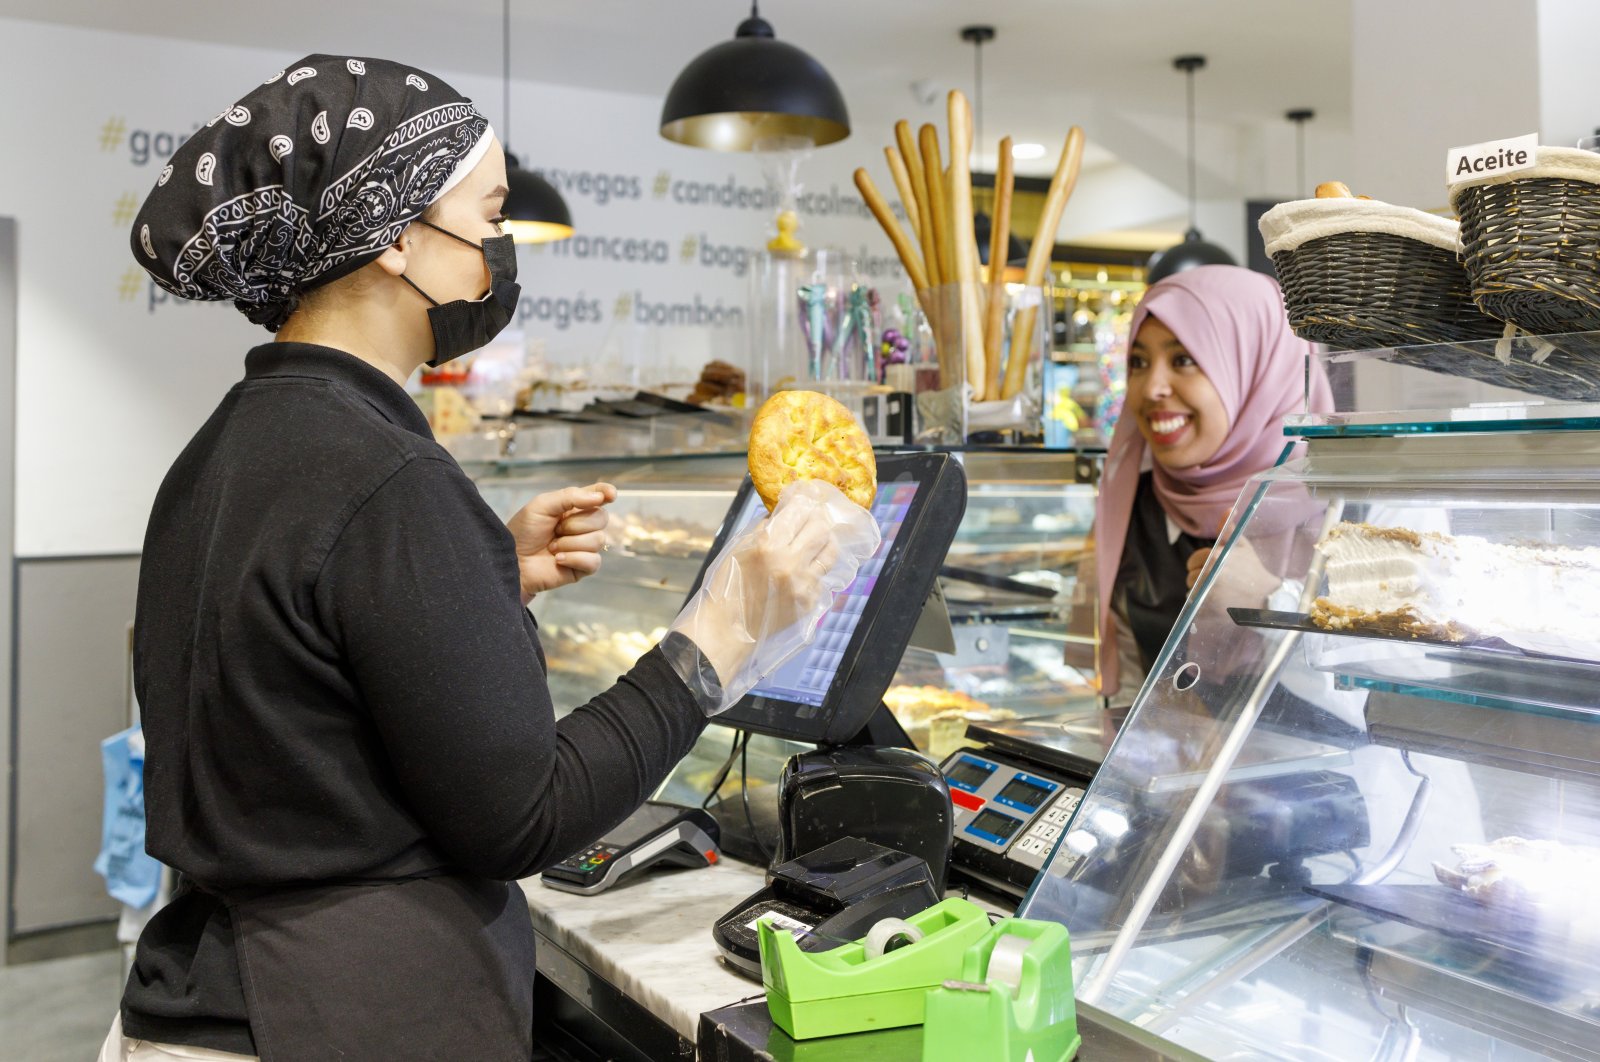 A smiling woman wearing a Muslim headscarf (hijab) buying food from a bakery at an unspecified location in this undated file photo. (Getty Images, File Photo)